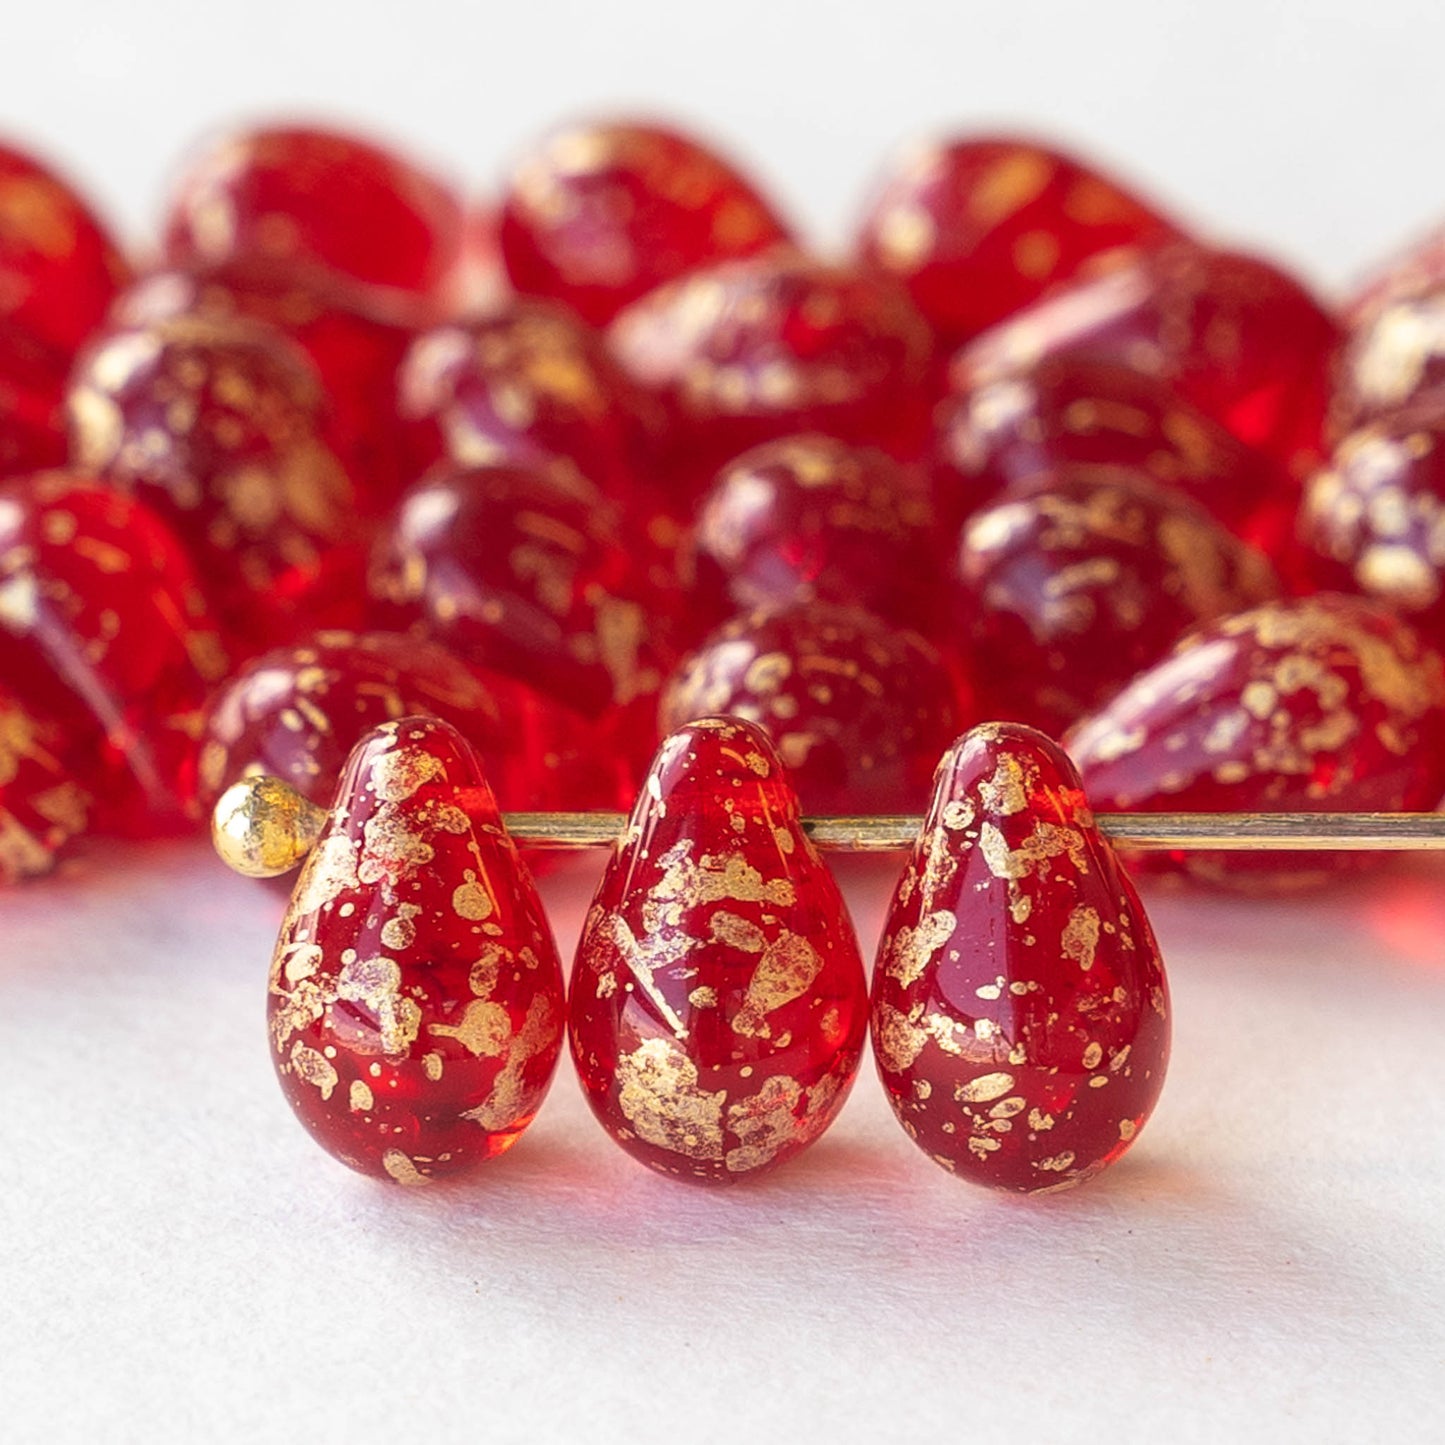 6x9mm Glass Teardrop Beads - Red with Gold Dust - 50 Beads